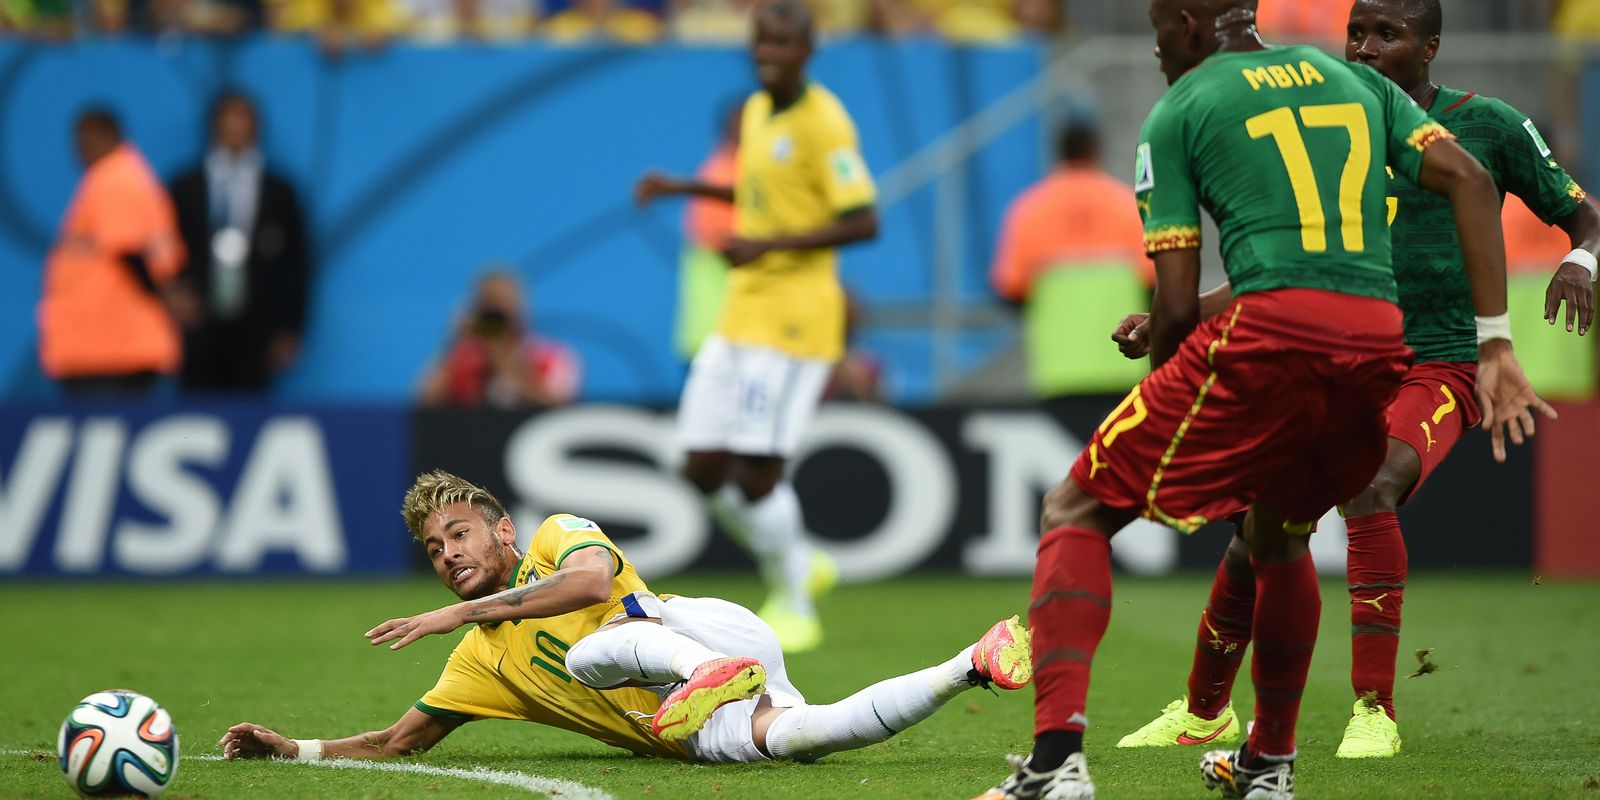 Cameroon crosses Brazil's path again in a World Cup